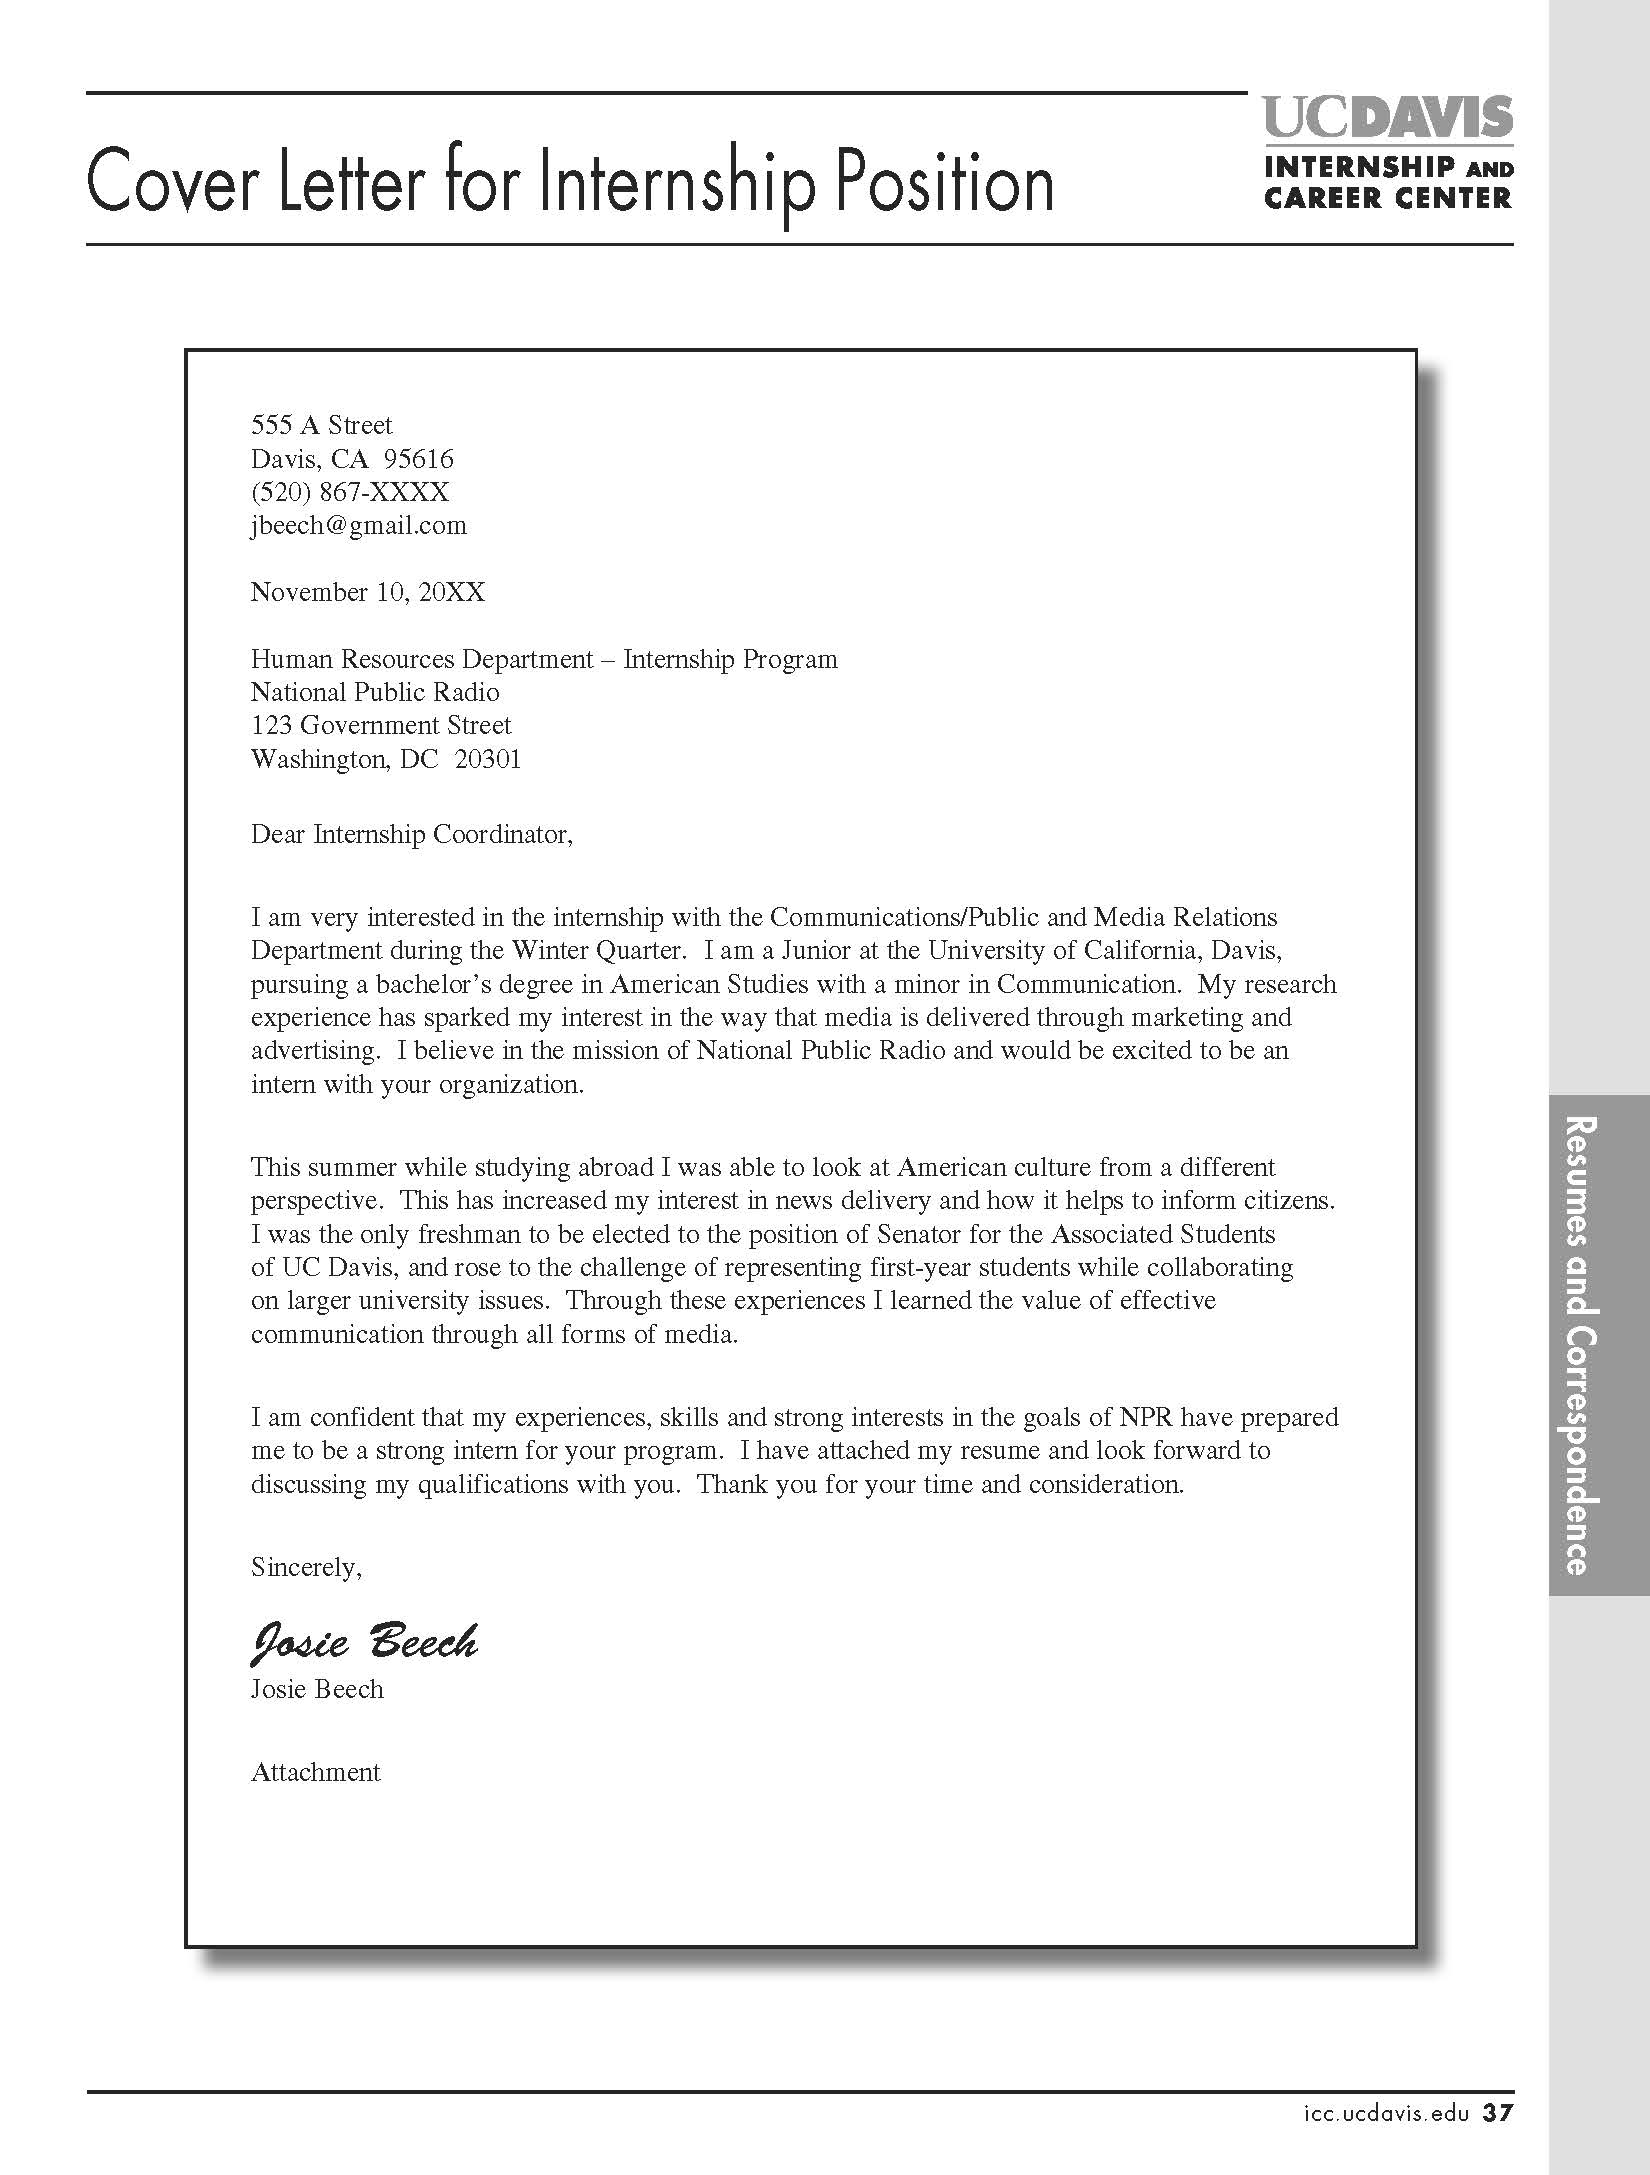 Effective Cover Letter Template from content.wisestep.com